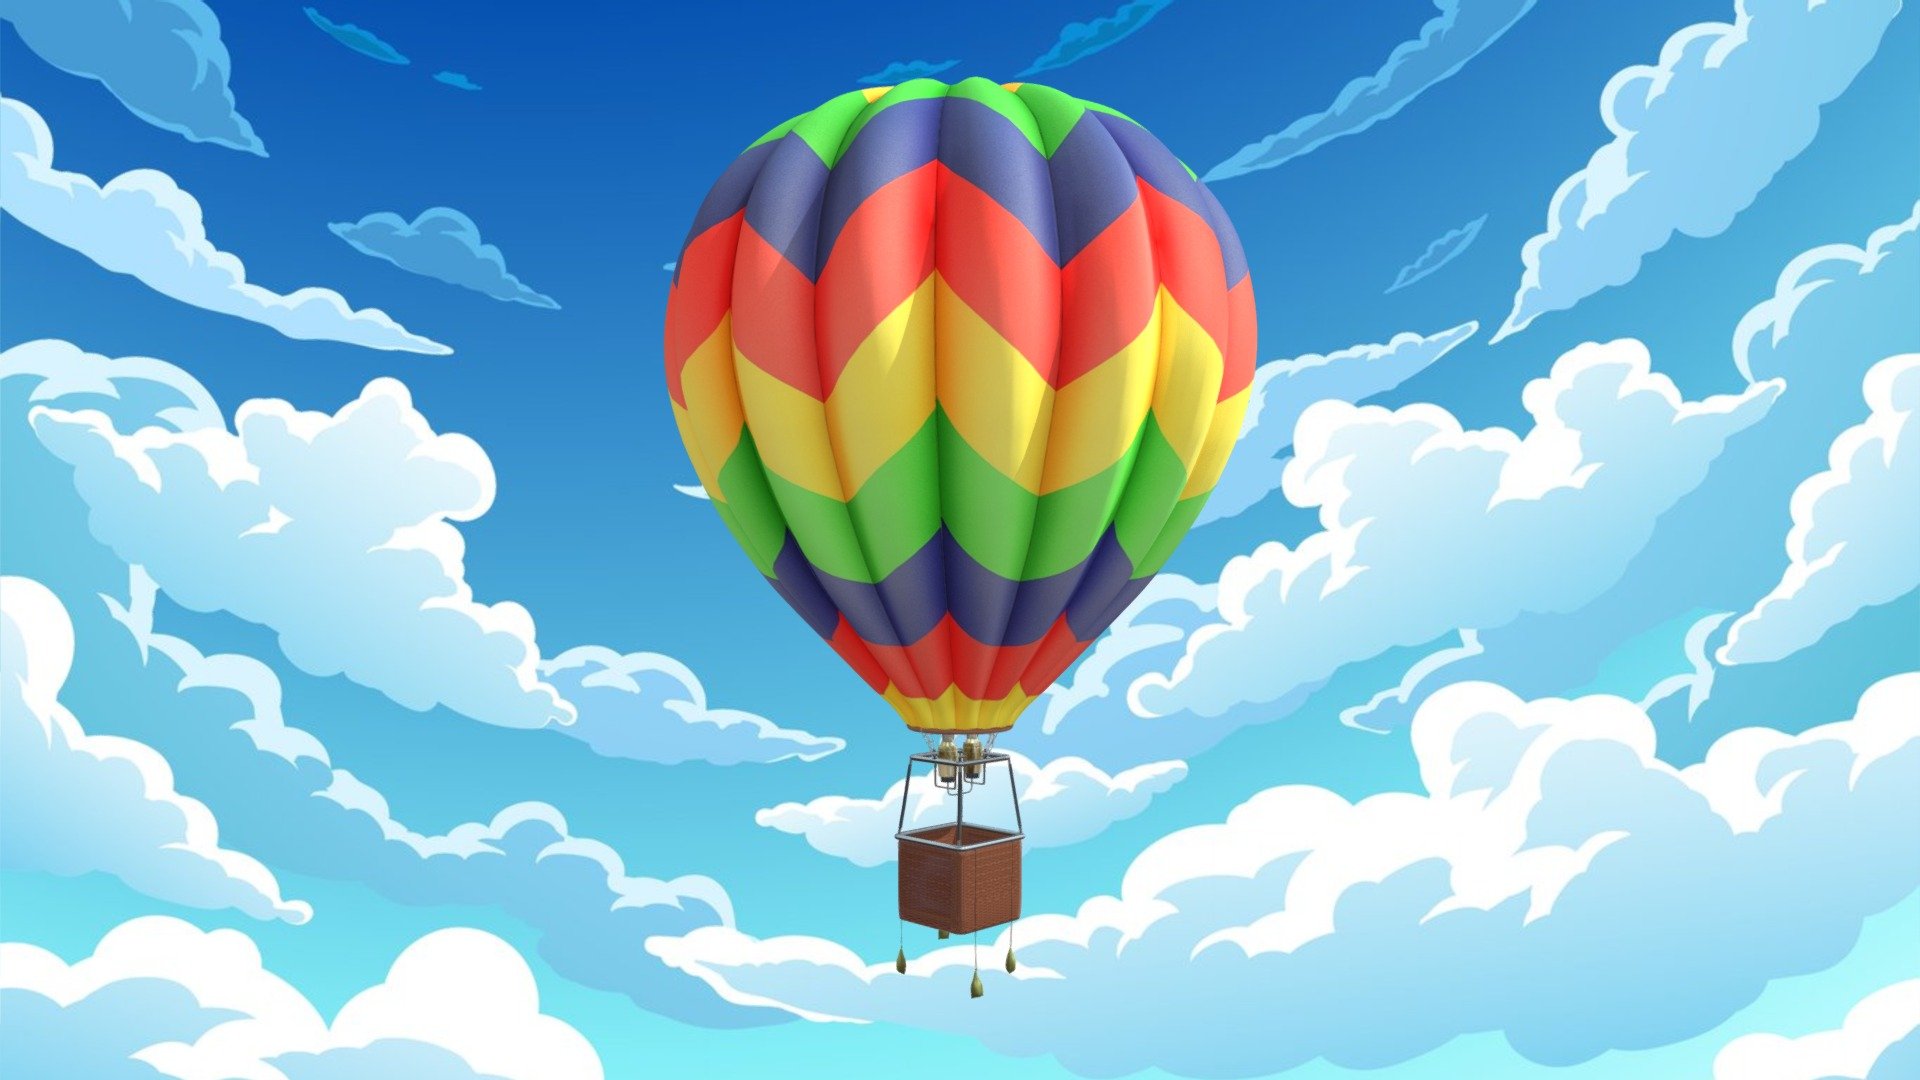 A hot air balloon is a unique aircraft that relies on the basic principle of buoyancy. It consists of a large, lightweight envelope filled with hot air and a gondola or basket for passengers and equipment. The concept behind a hot air balloon is simple but elegant: hot air is lighter than cold air, so when the air inside the balloon is heated, it becomes less dense, causing the balloon to rise.

Hot air balloons are often used for recreational purposes and provide a serene and picturesque way to view landscapes from above. The gondola typically carries passengers and a pilot, and the flight is controlled by heating or cooling the air inside the balloon to ascend or descend.

Hot air ballooning represents a leisurely and eco-friendly form of flight, offering a tranquil experience and breathtaking views of the world from a unique perspective. It's a testament to human ingenuity and the pursuit of adventure in the realm of aviation 3d model